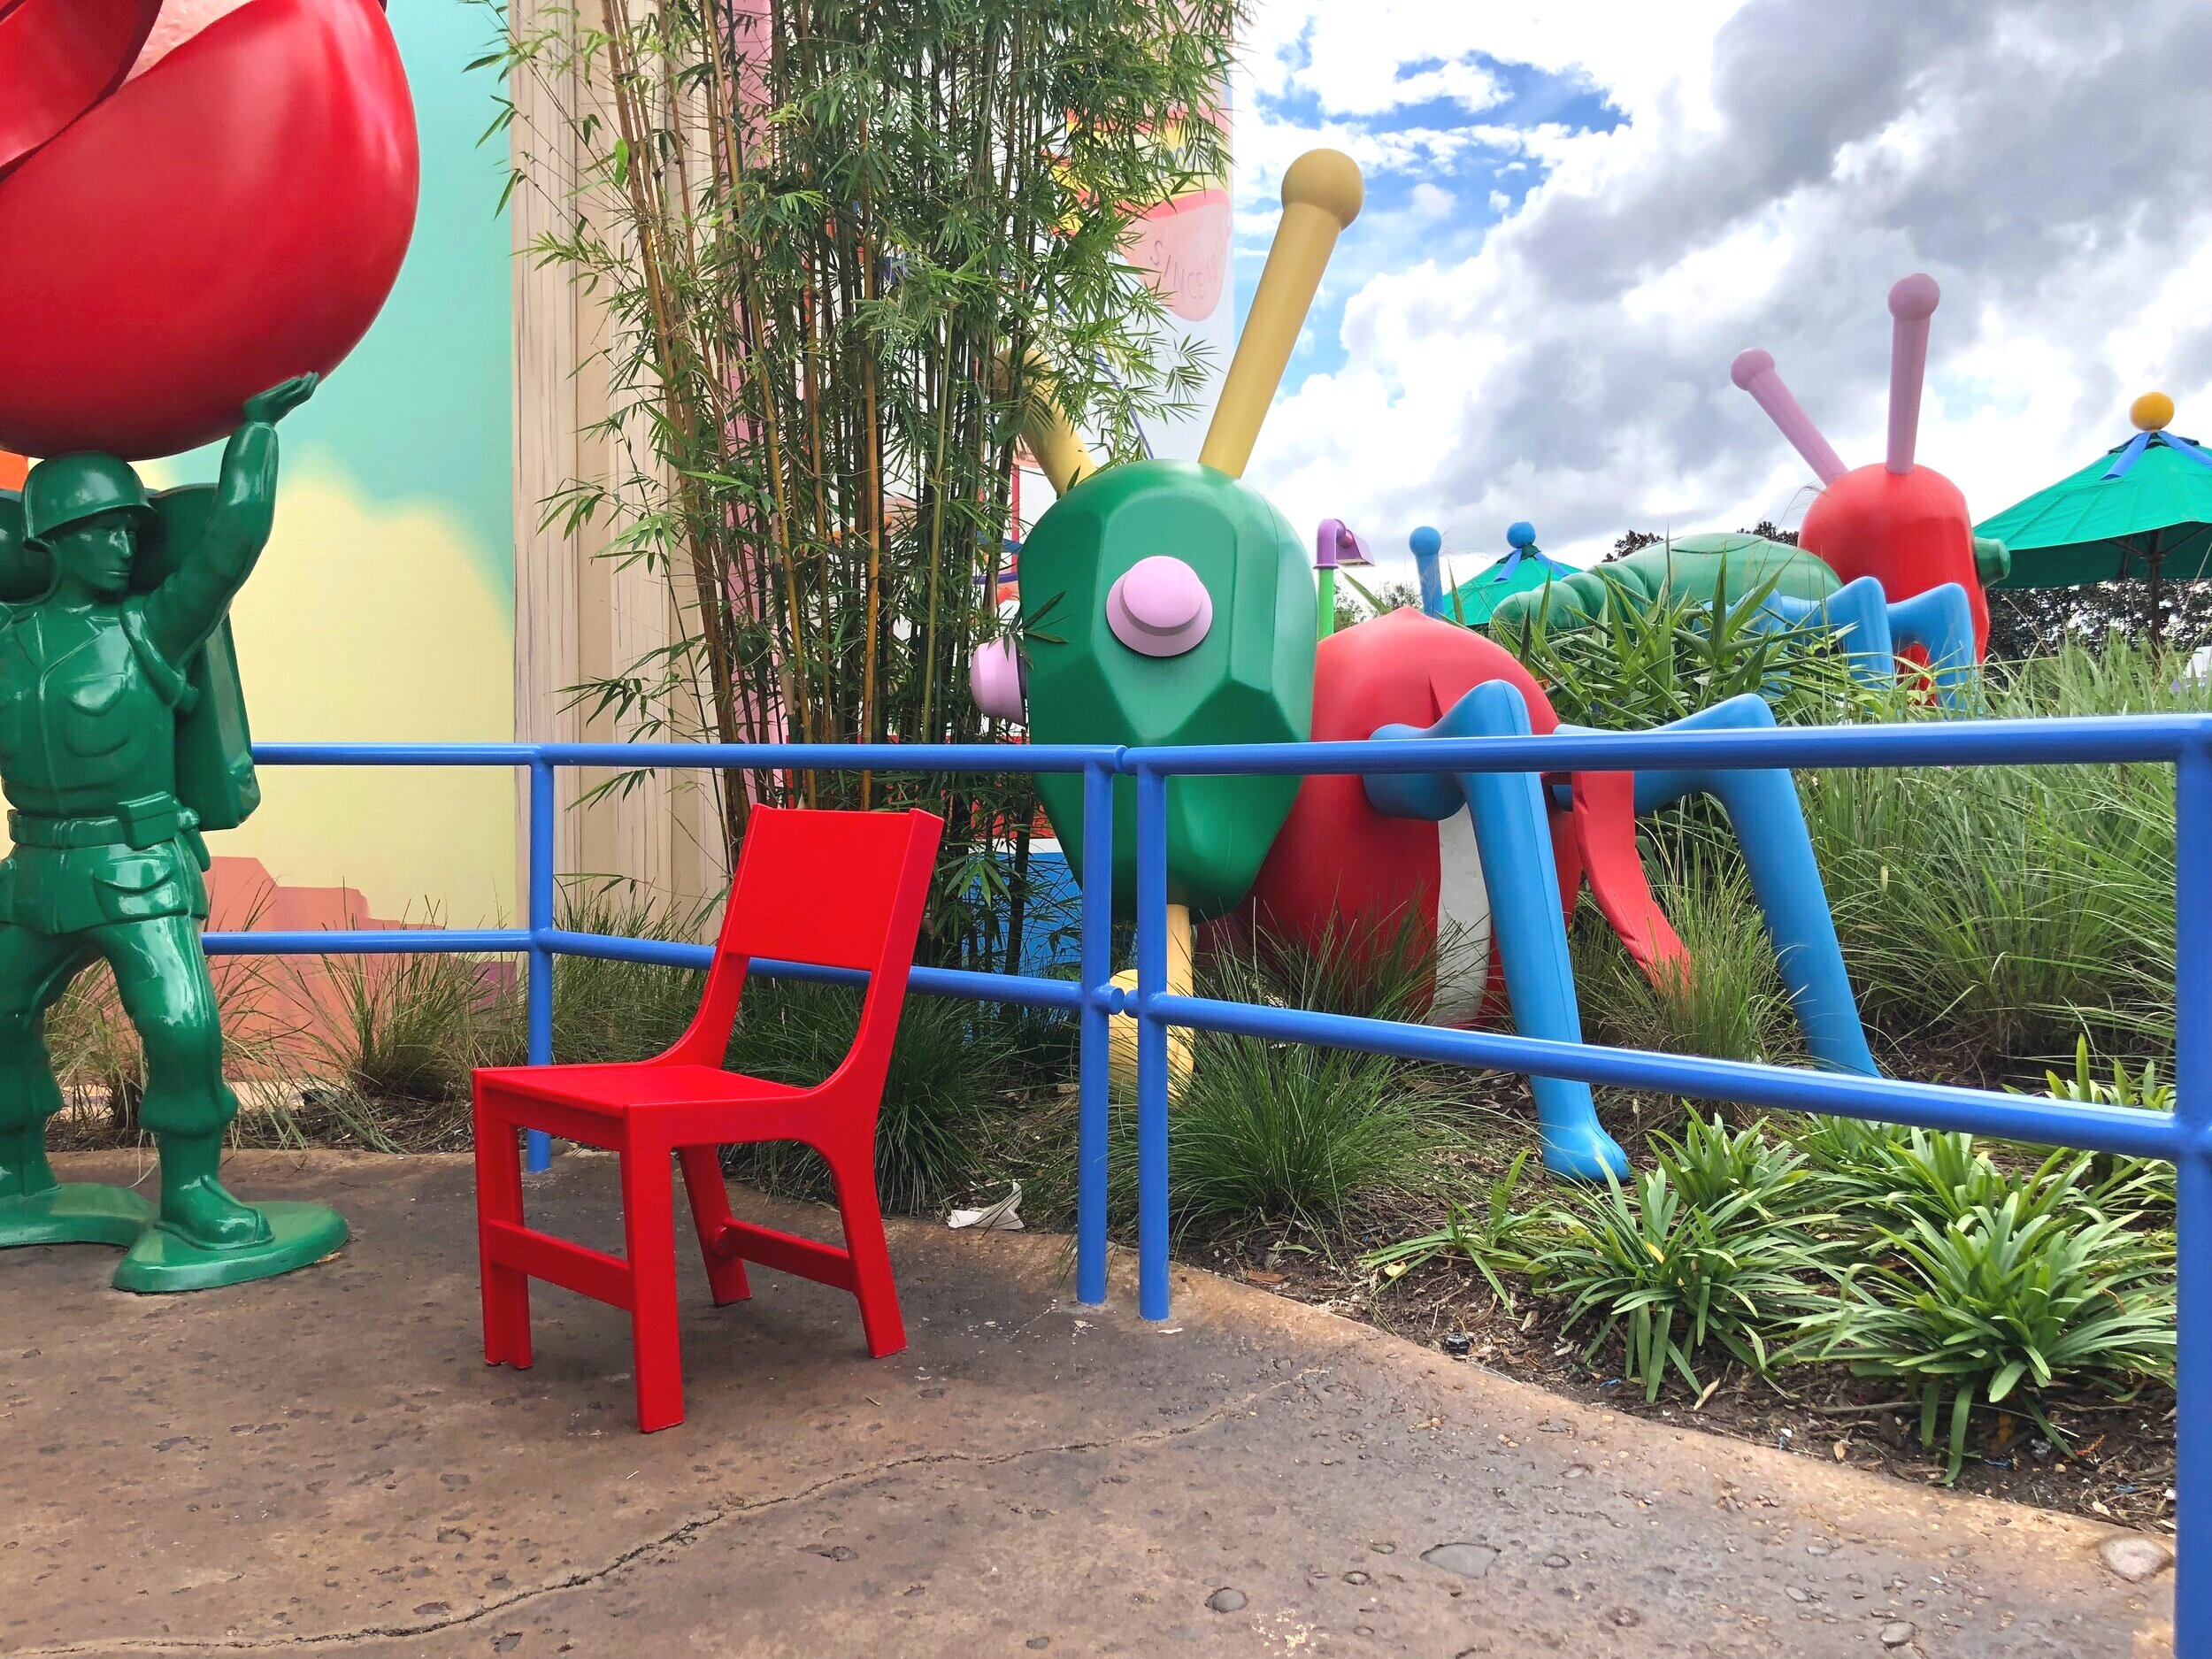  Cootie Bel Bug on site after being installed at Toy Story Land.  